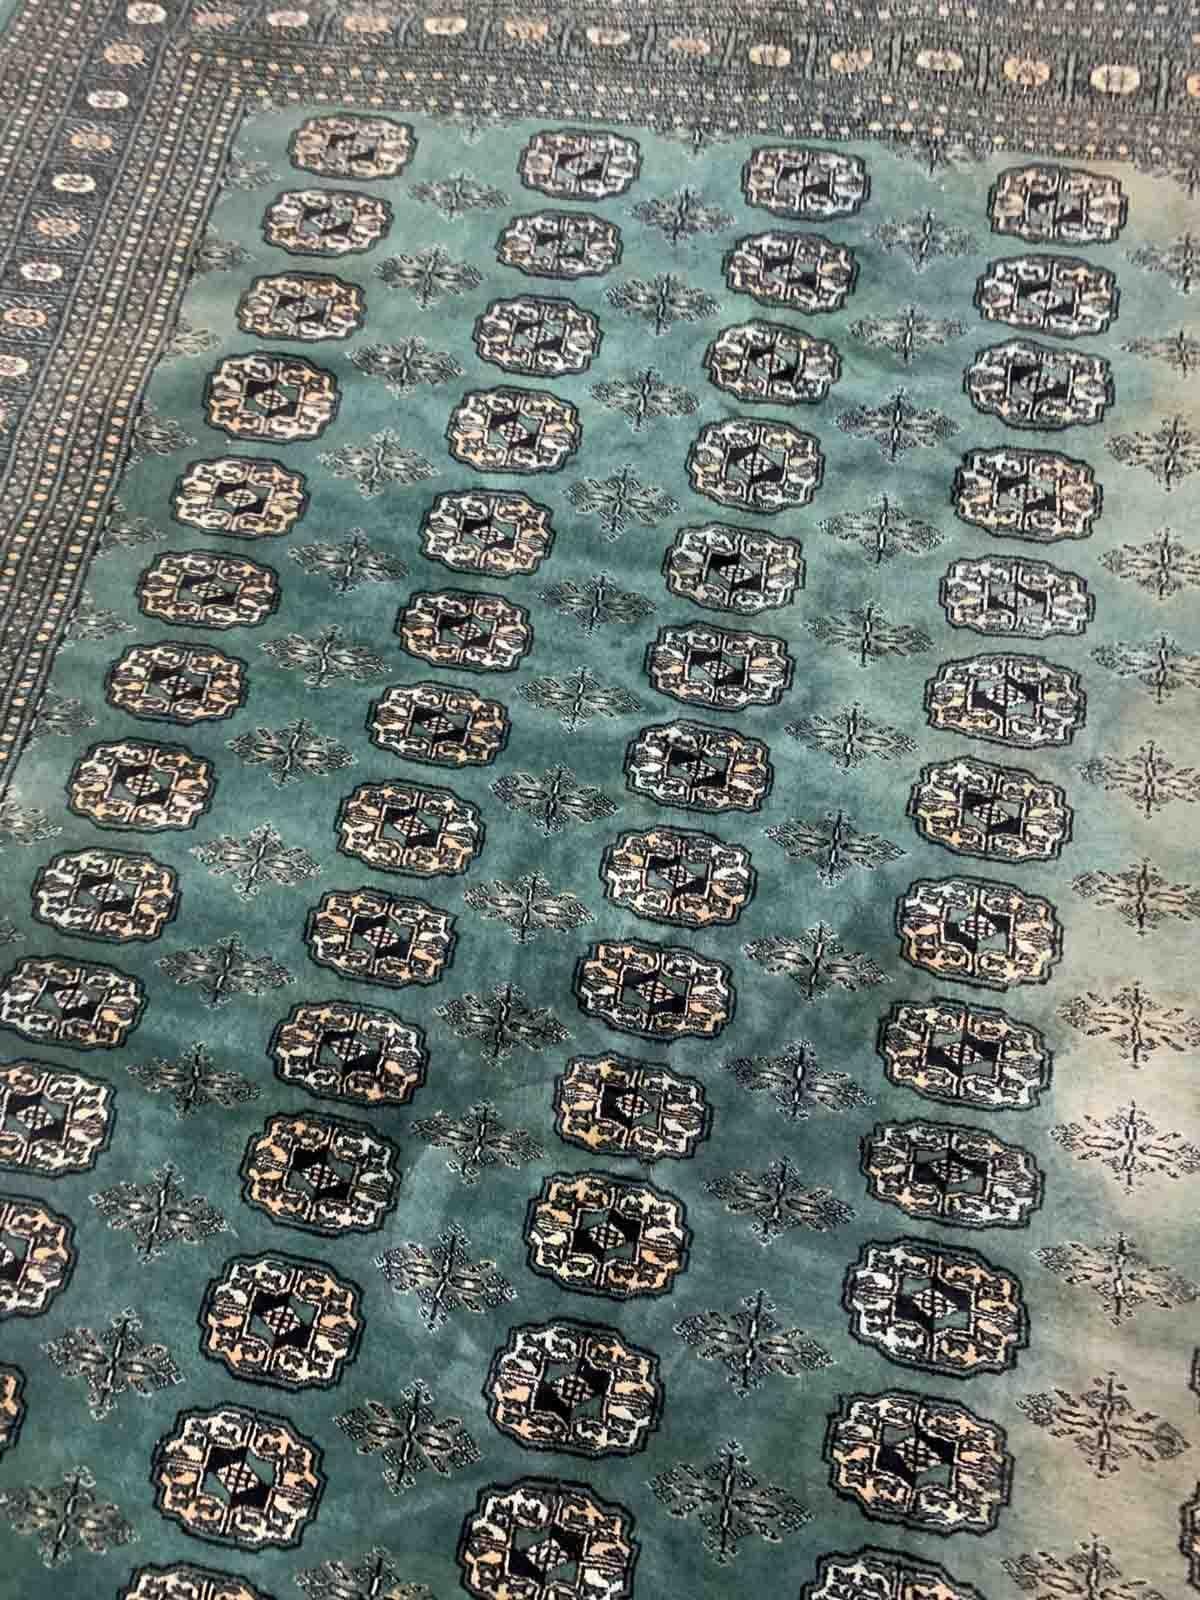 Handmade vintage Uzbek Bukhara rug in Turquoise shade and traditional design. The rug is from the end of 20th century in original condition, it has some age discolorations.

-condition: original, age discolorations,

-circa: 1970s,

-size: